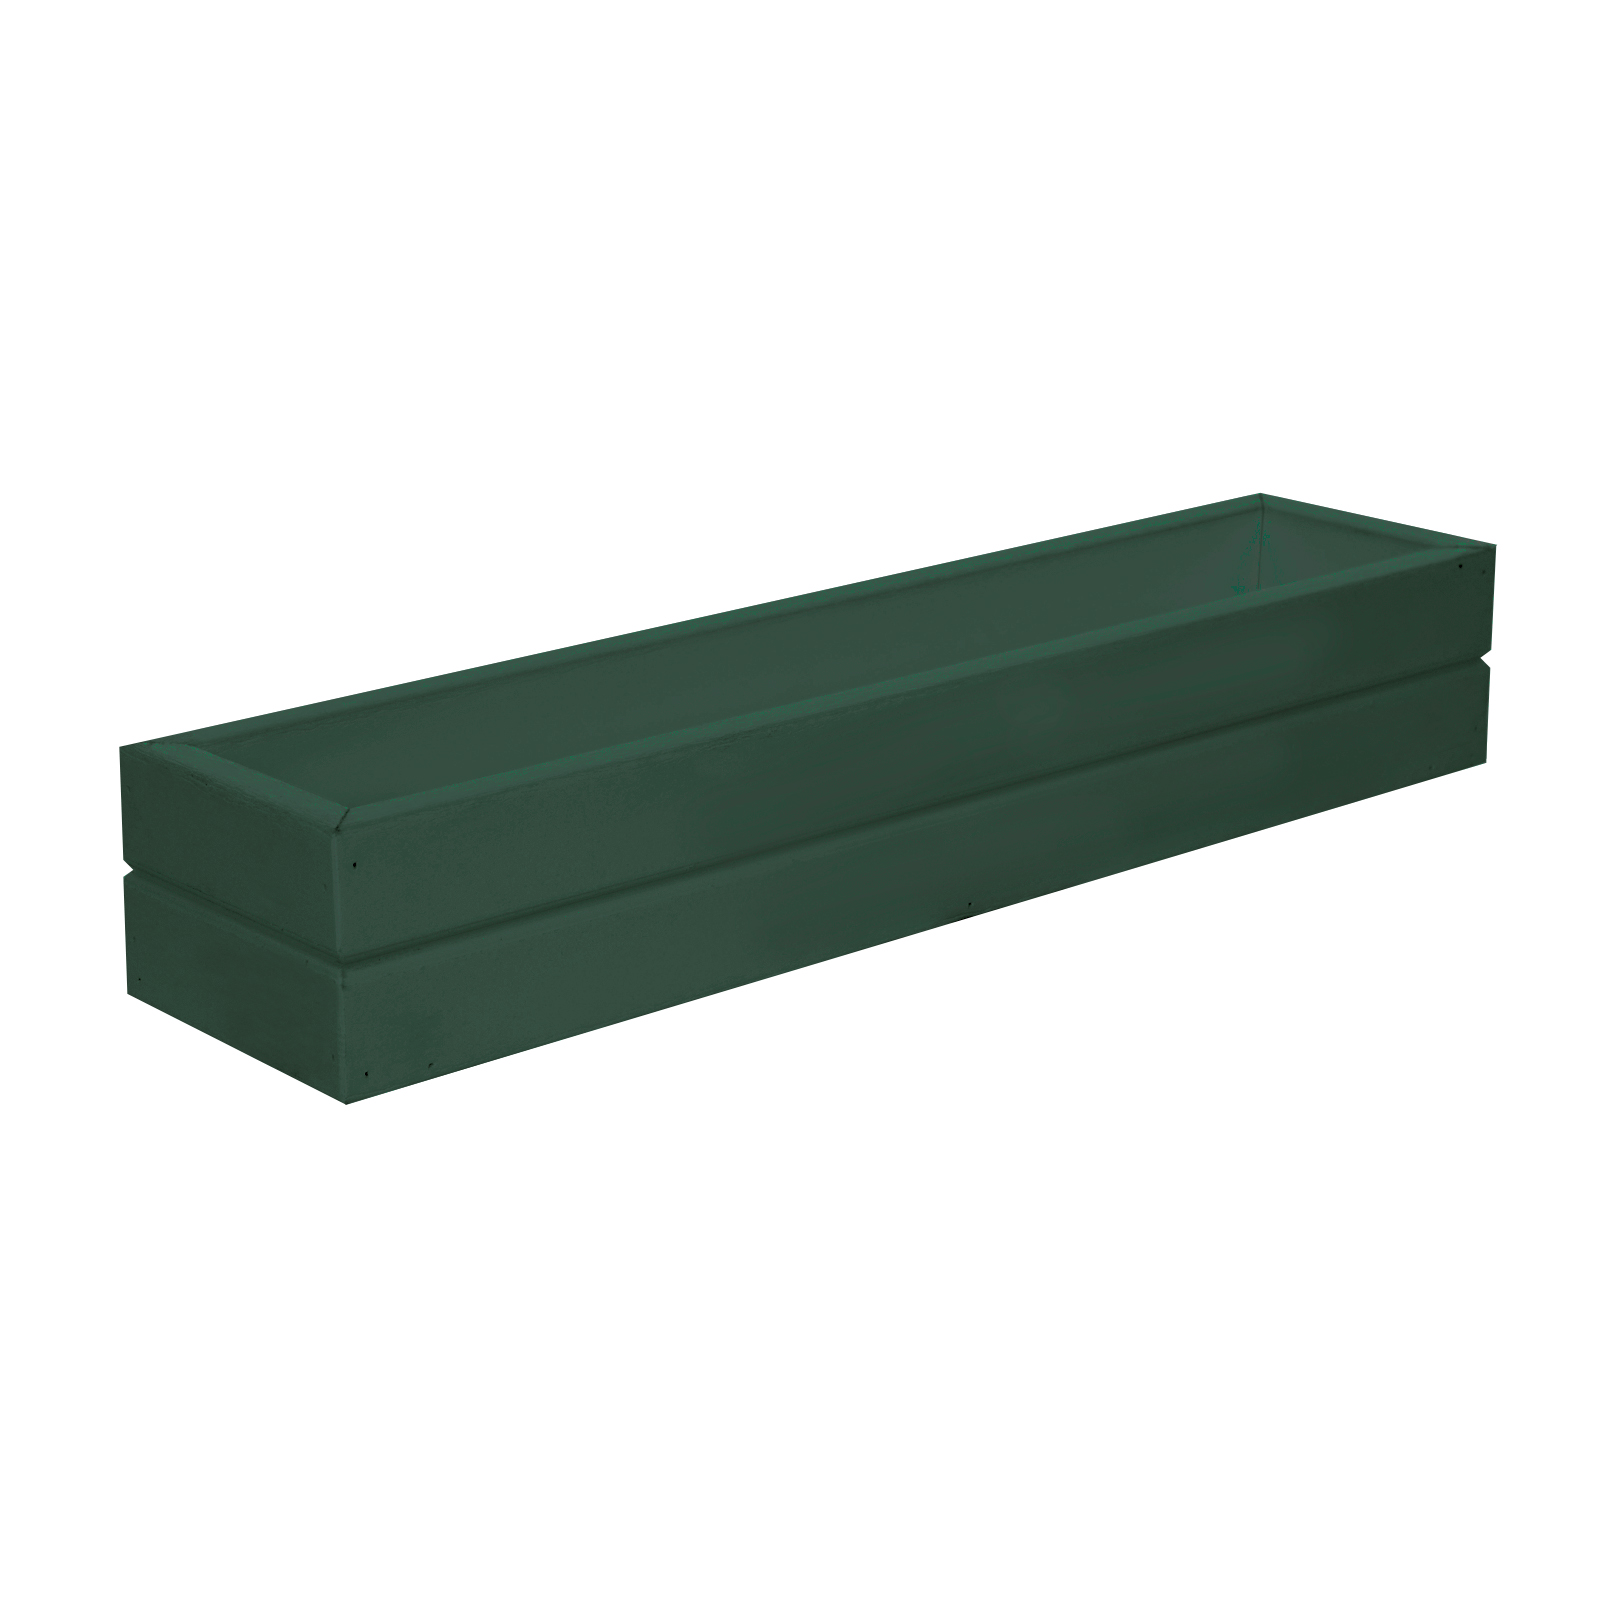 Small Herb Commercial Grade Planter Window Box, Green